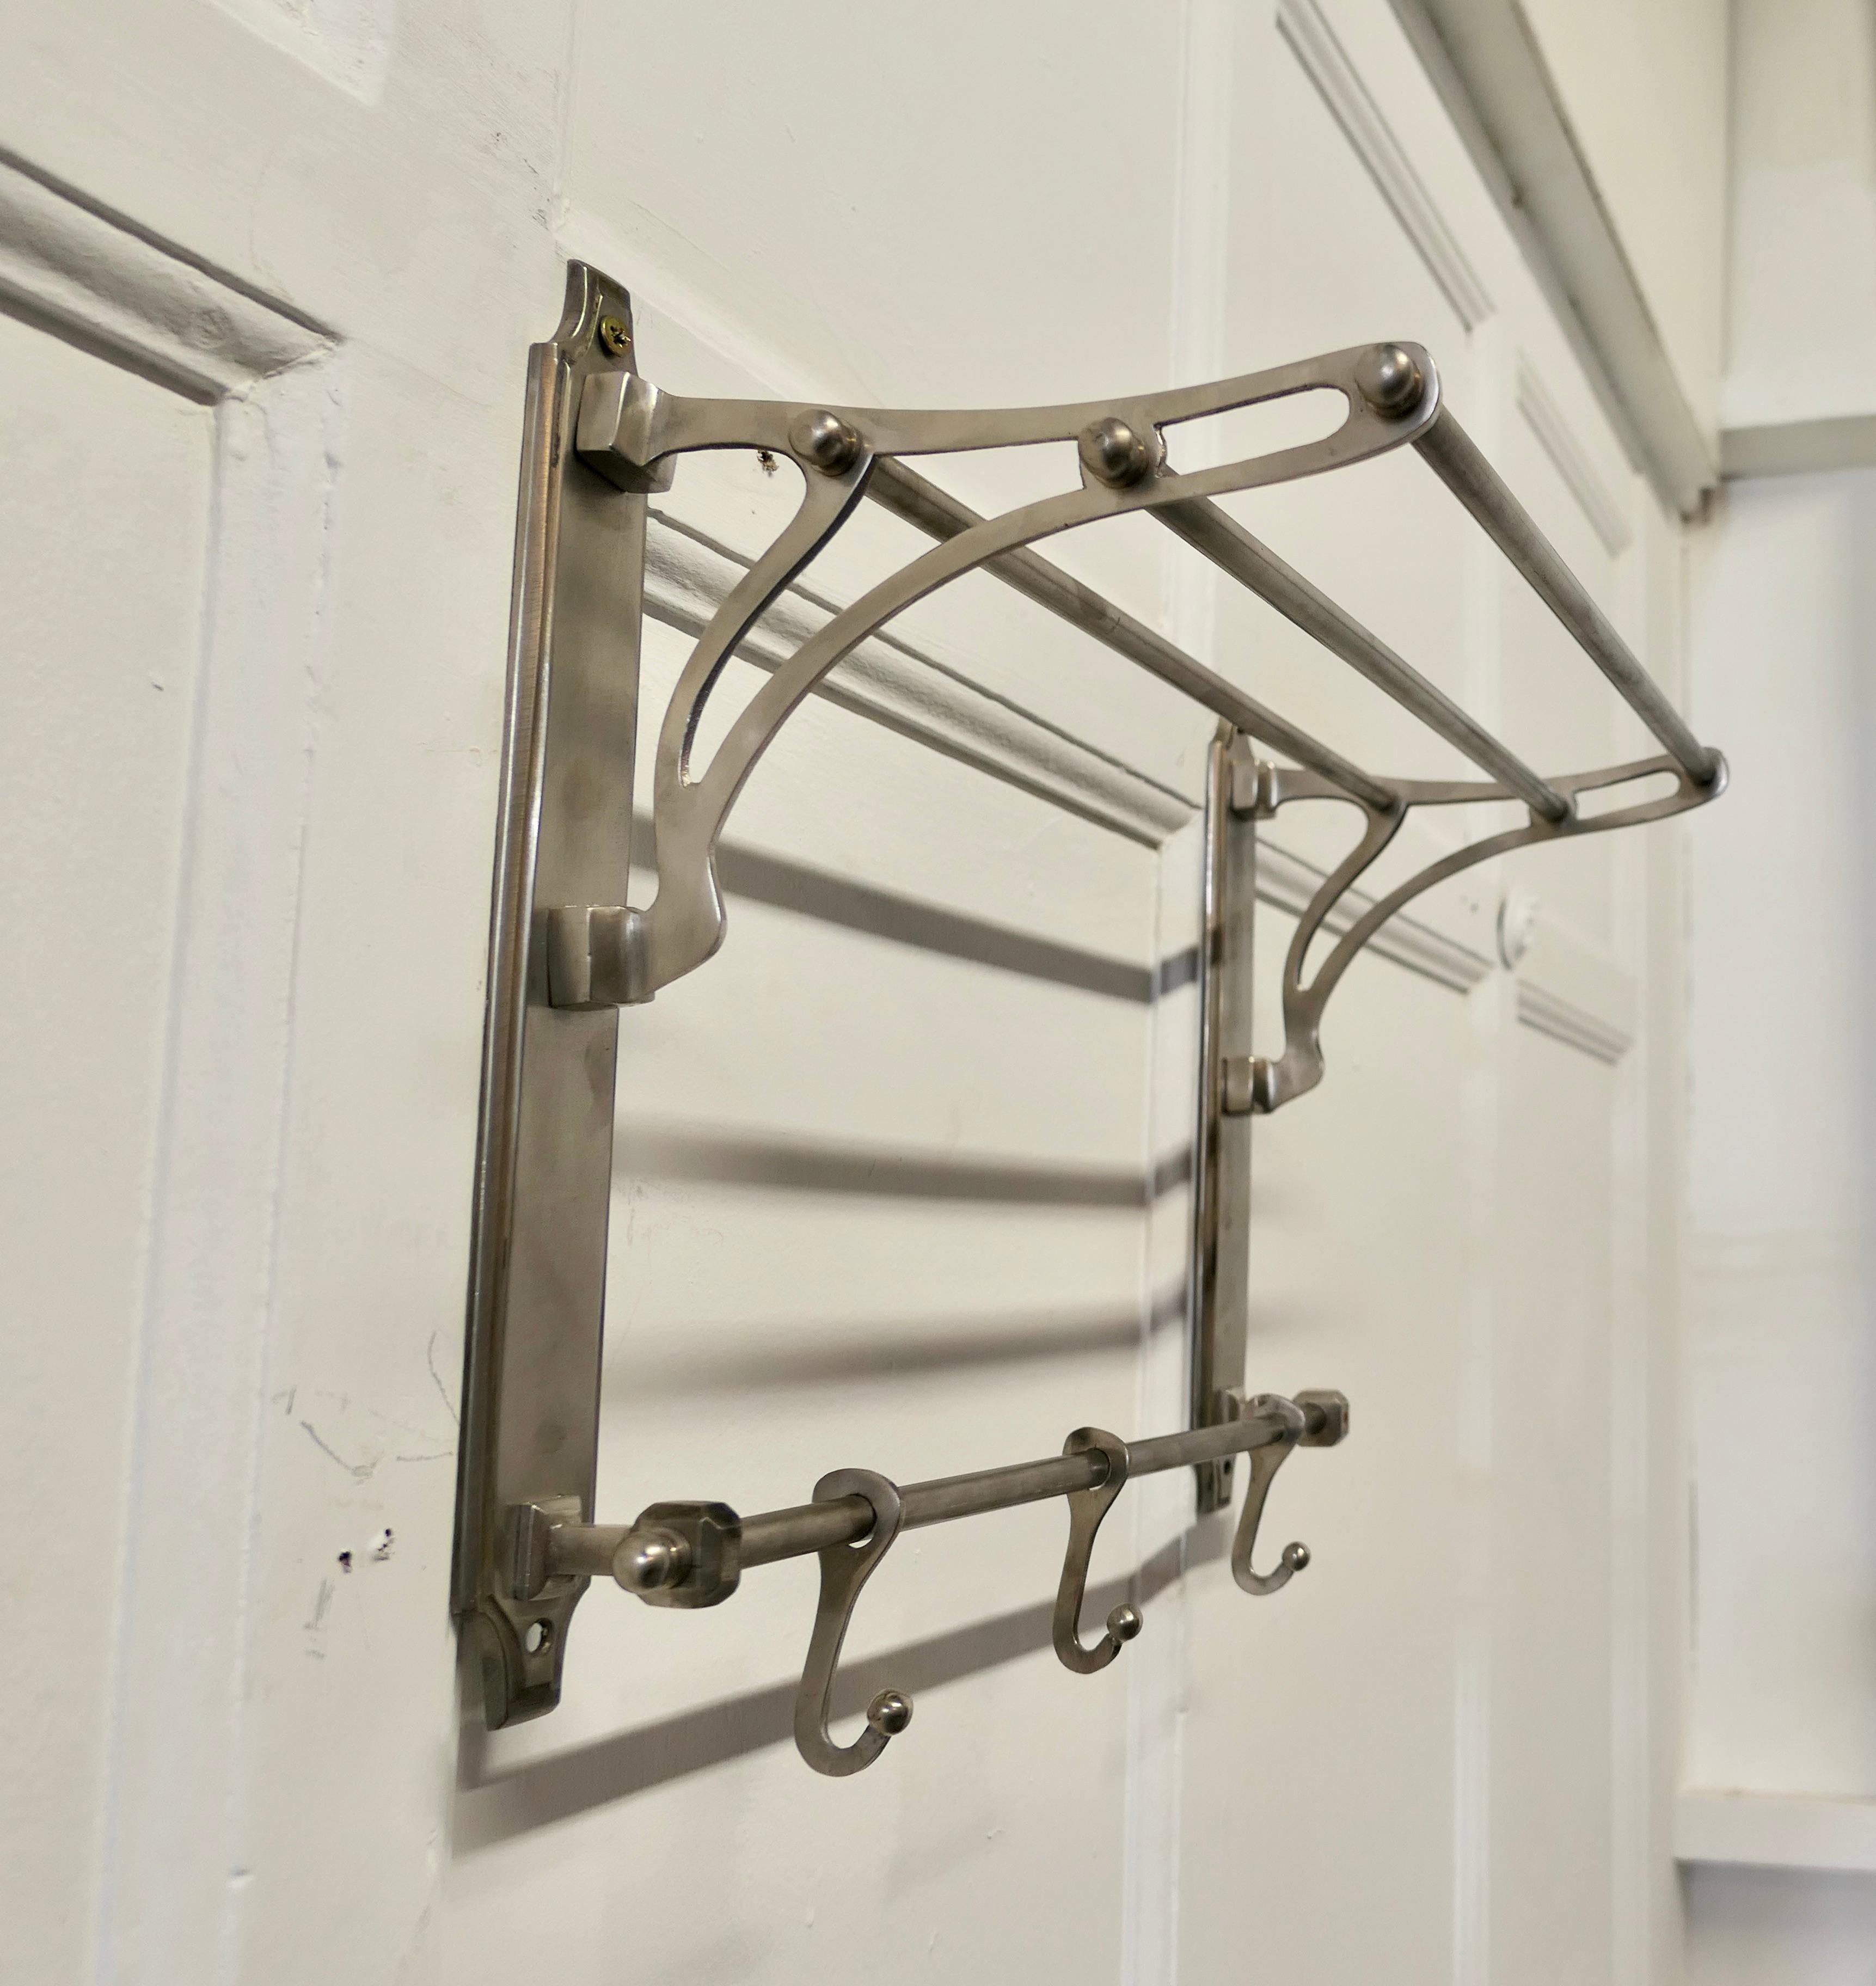 Small French Art Deco hat and coat rack, Pullman Railway Train style.

 This Art Deco style hat and coat rack has 3 sliding hooks and an upper railed shelf 
Racks like these were used on French railway trains just like the ones on “the Orient